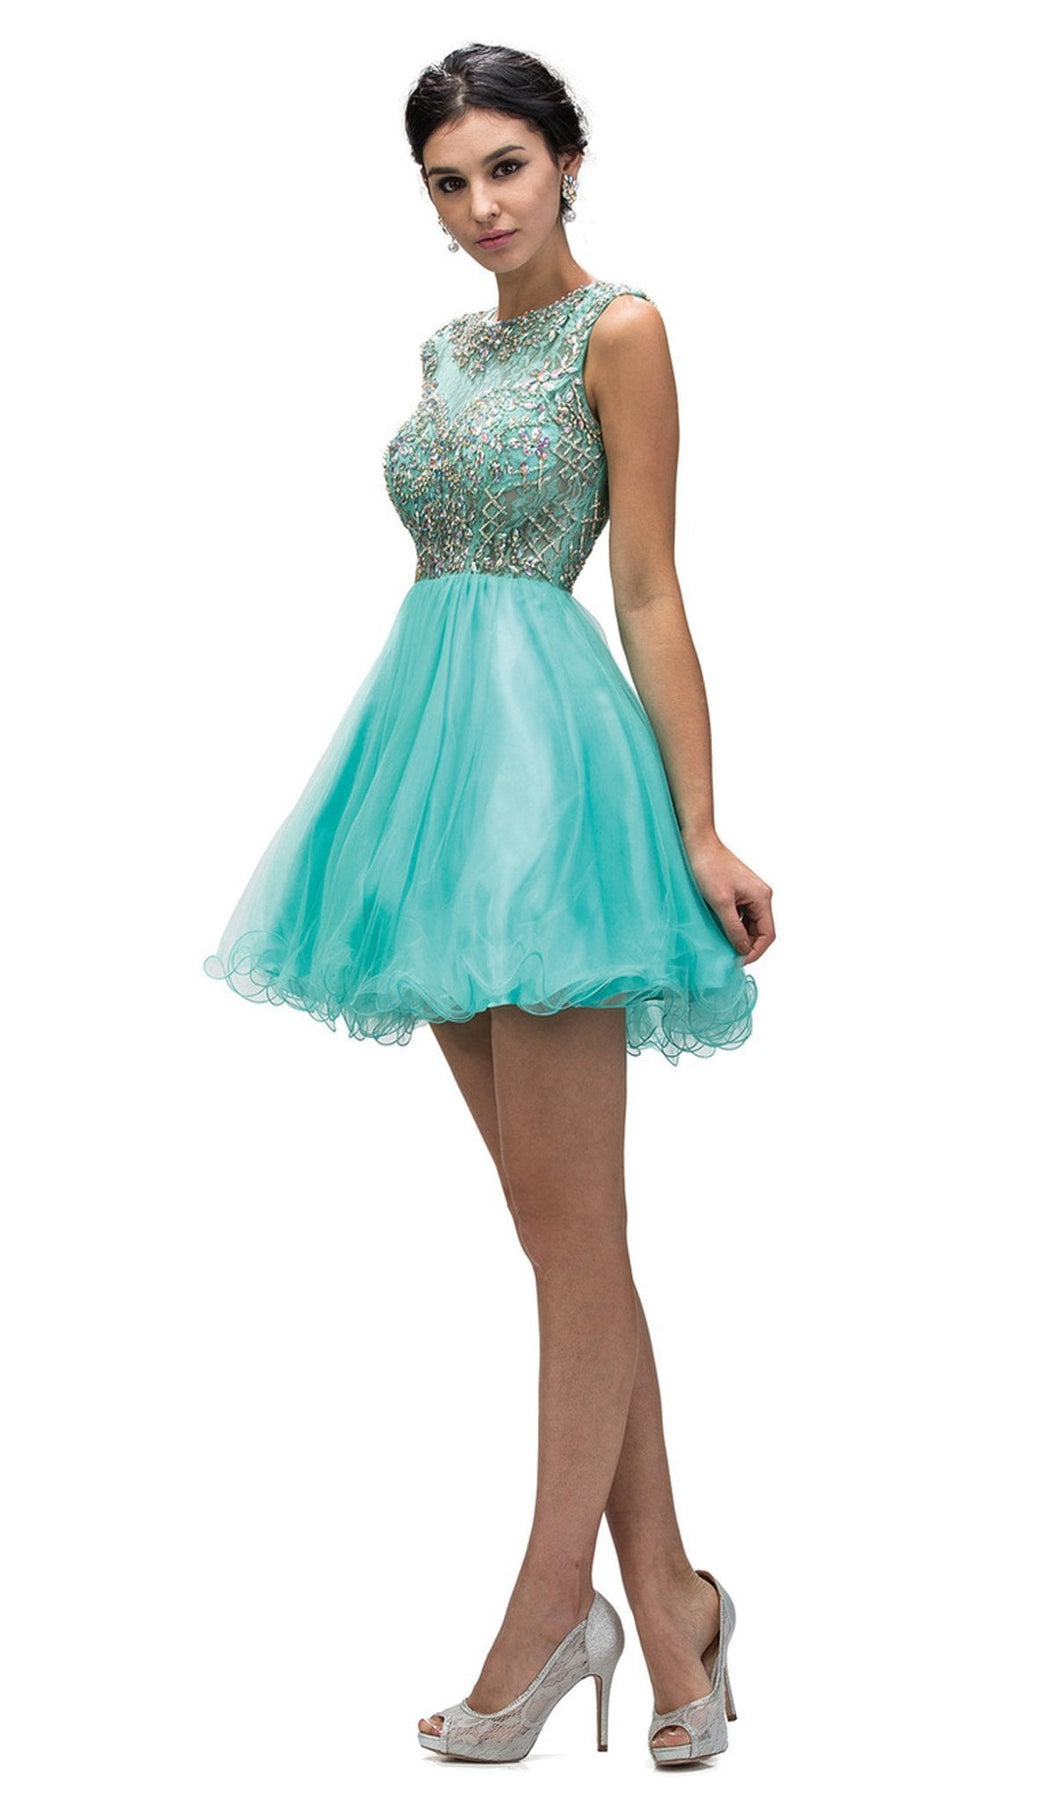 Dancing Queen - 9149 Cap Sleeve Crystal Beaded Cocktail Dress Party Dresses